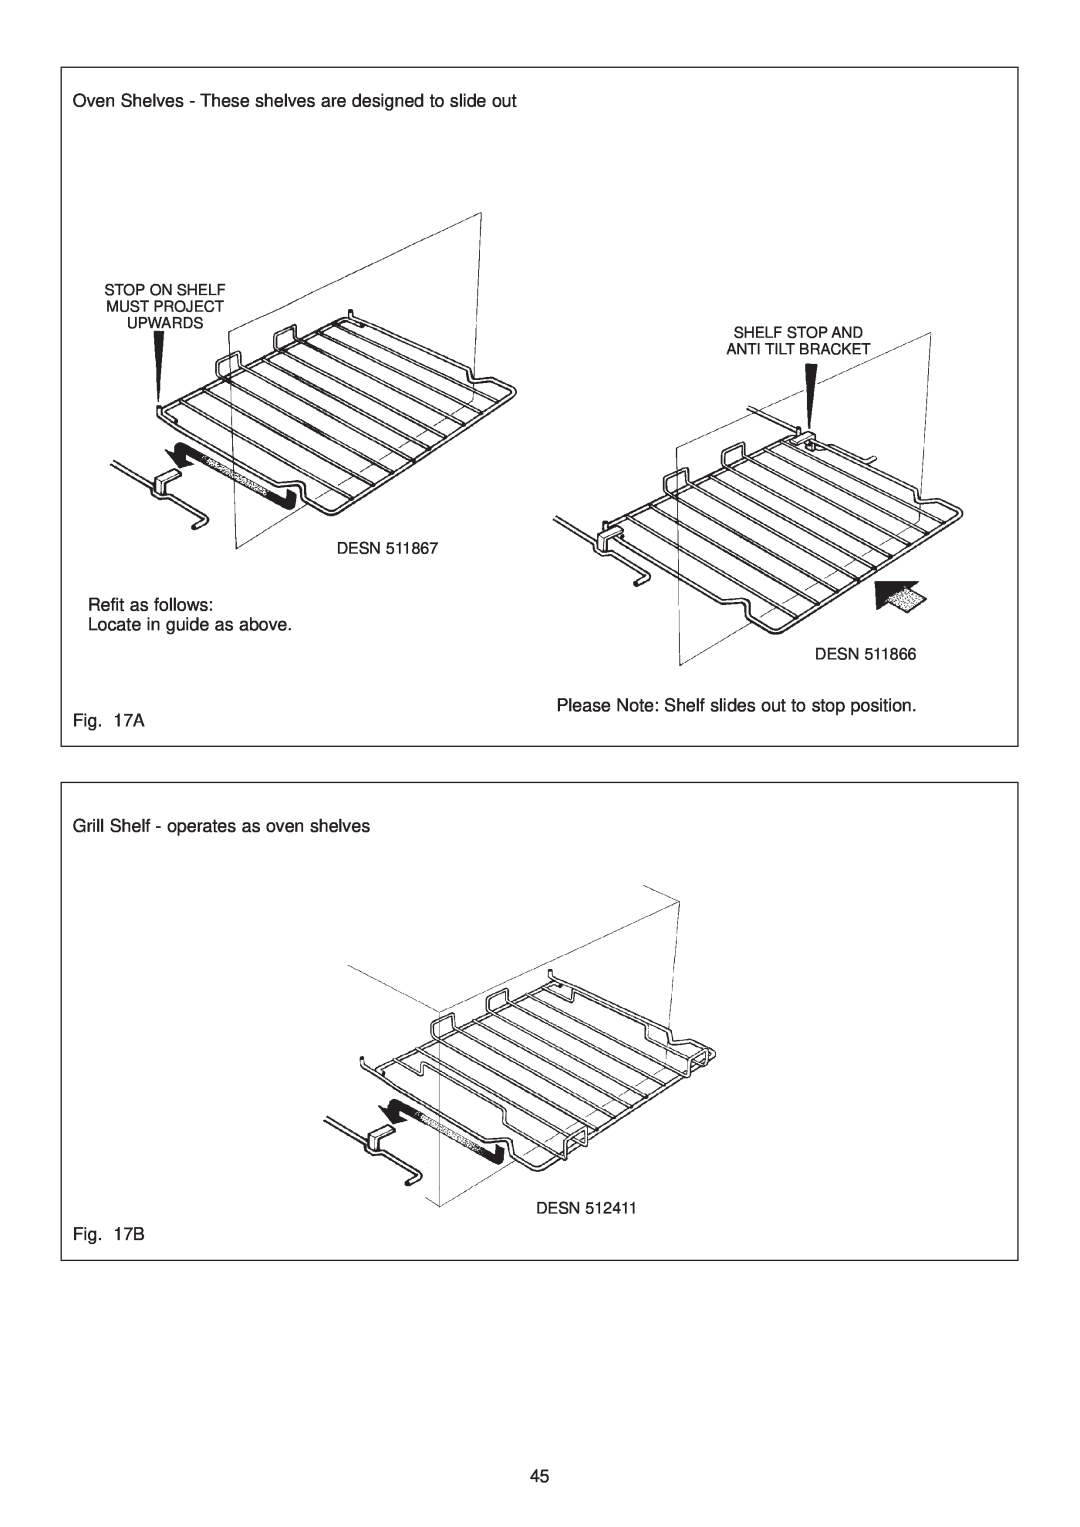 Aga Ranges DESN 512387 A Oven Shelves - These shelves are designed to slide out, Refit as follows Locate in guide as above 